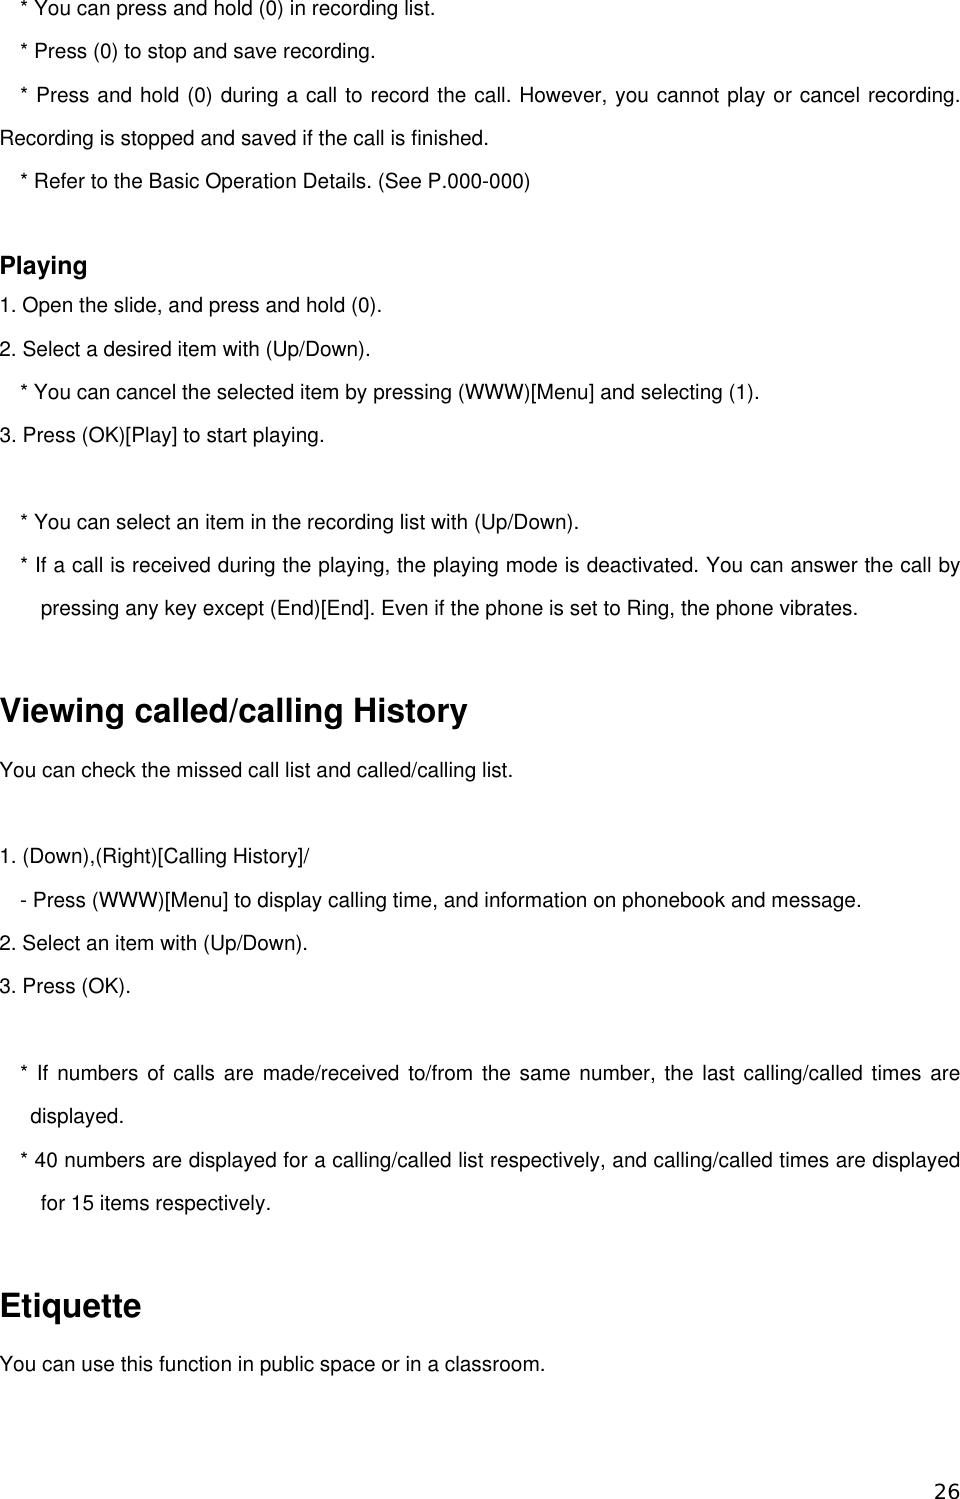 * You can press and hold (0) in recording list. * Press (0) to stop and save recording. * Press and hold (0) during a call to record the call. However, you cannot play or cancel recording. Recording is stopped and saved if the call is finished.   * Refer to the Basic Operation Details. (See P.000-000)  Playing 1. Open the slide, and press and hold (0).   2. Select a desired item with (Up/Down). * You can cancel the selected item by pressing (WWW)[Menu] and selecting (1). 3. Press (OK)[Play] to start playing.  * You can select an item in the recording list with (Up/Down).       * If a call is received during the playing, the playing mode is deactivated. You can answer the call by pressing any key except (End)[End]. Even if the phone is set to Ring, the phone vibrates.    Viewing called/calling History You can check the missed call list and called/calling list.  1. (Down),(Right)[Calling History]/ - Press (WWW)[Menu] to display calling time, and information on phonebook and message.   2. Select an item with (Up/Down). 3. Press (OK).    * If numbers of calls are made/received to/from the same number, the last calling/called times are displayed. * 40 numbers are displayed for a calling/called list respectively, and calling/called times are displayed for 15 items respectively.    Etiquette You can use this function in public space or in a classroom.     26